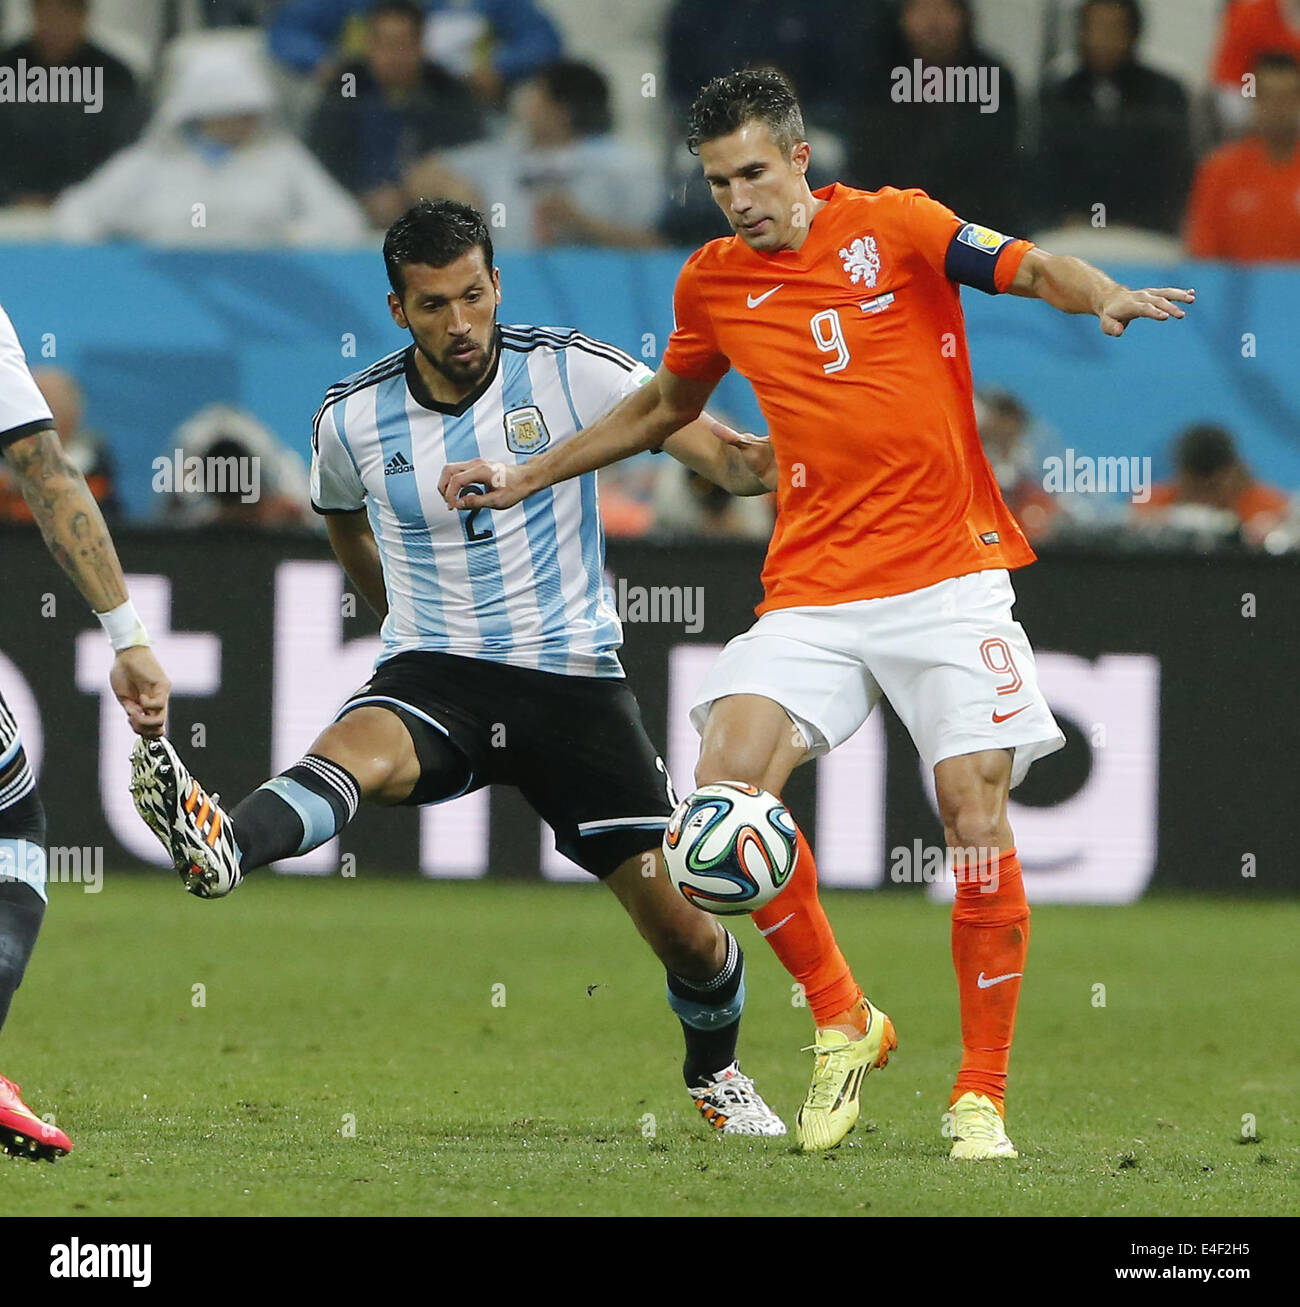 Sao Paulo, Brazil. 9th July, 2014. Netherlands' Robin van Persie (R) controls the ball against Argentina's Ezequiel Garay during a semifinal match between Netherlands and Argentina of 2014 FIFA World Cup at the Arena de Sao Paulo Stadium in Sao Paulo, Brazil, on July 9, 2014. Credit:  Zhou Lei/Xinhua/Alamy Live News Stock Photo